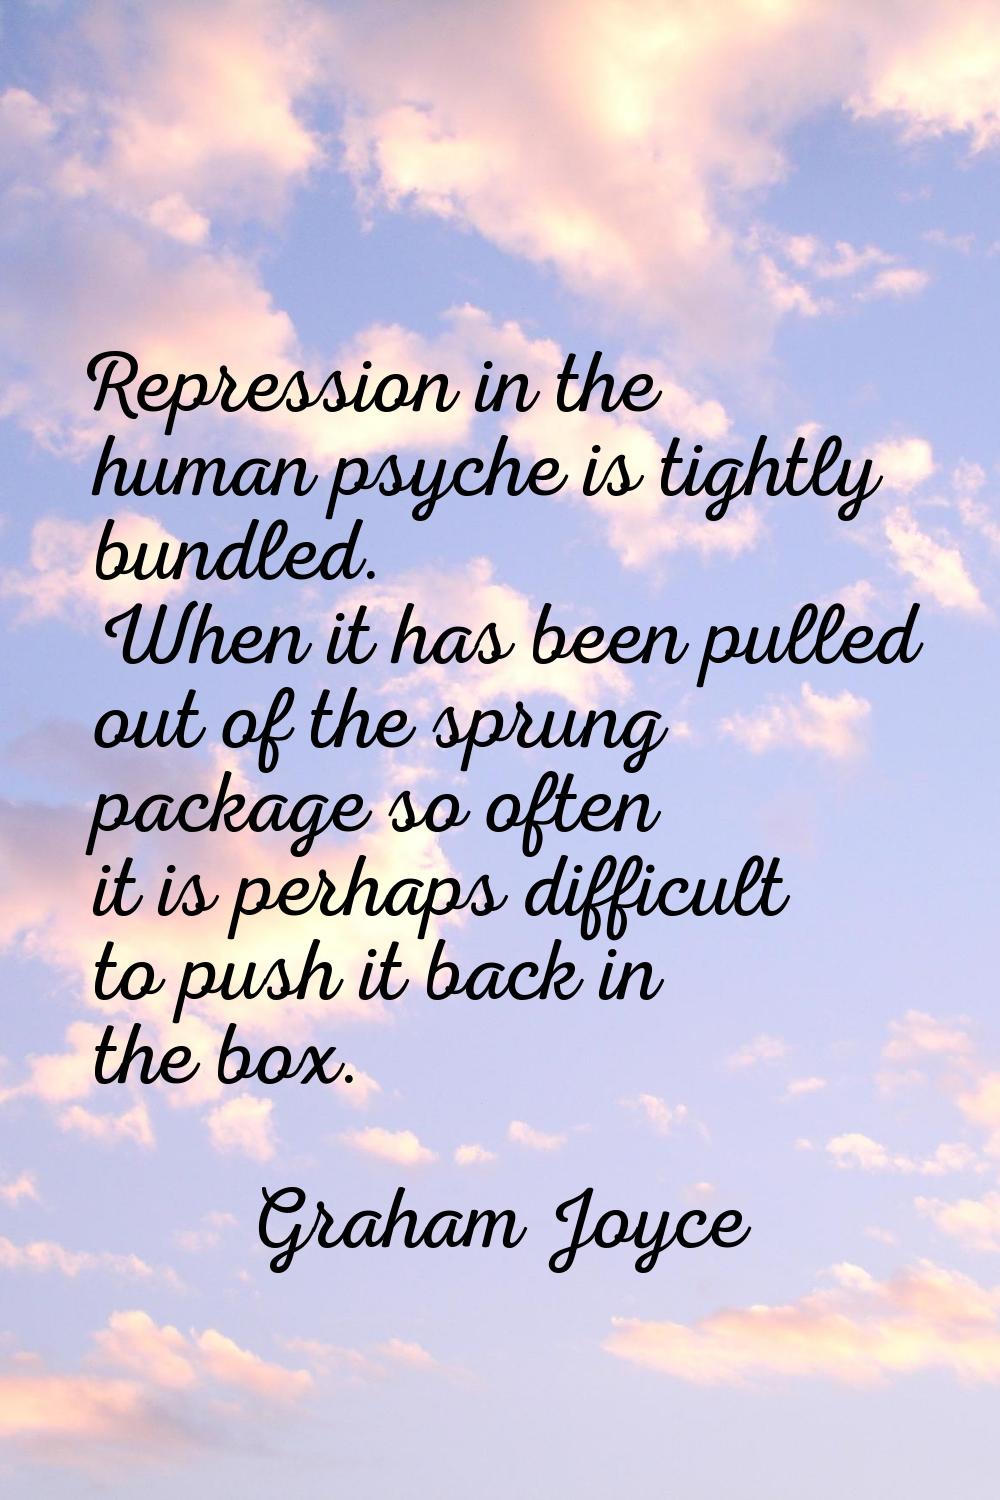 Repression in the human psyche is tightly bundled. When it has been pulled out of the sprung packag